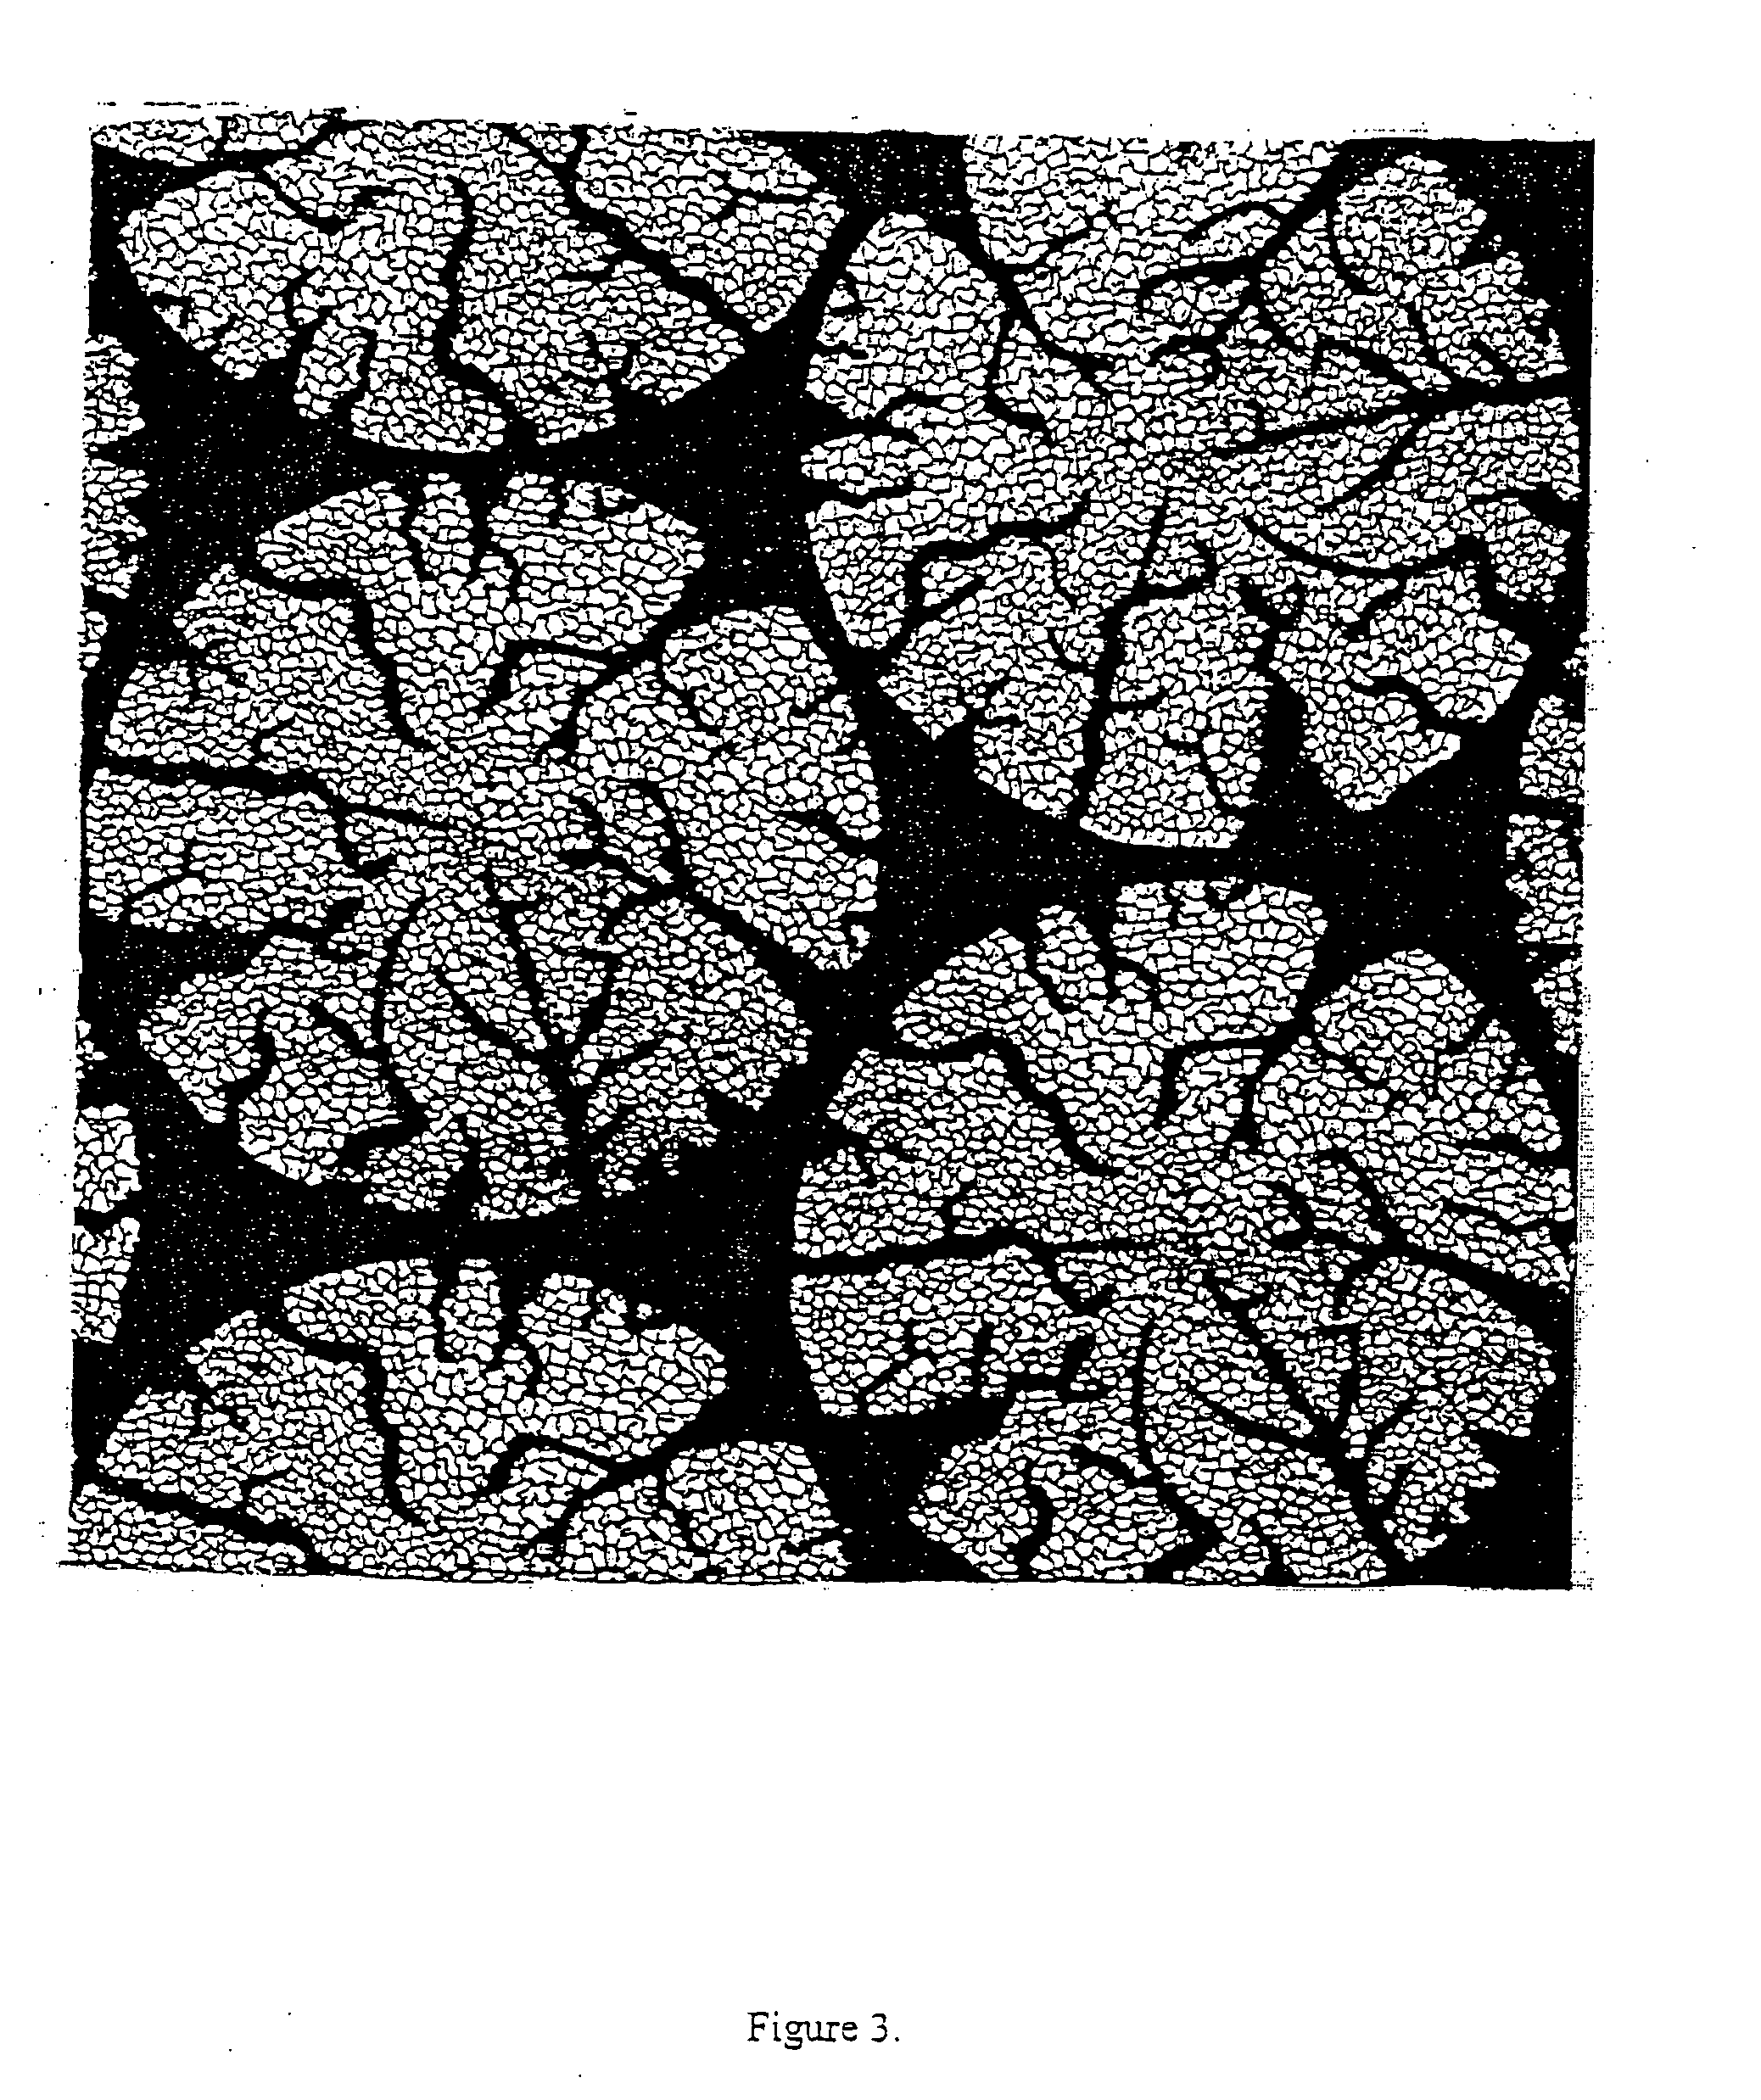 Structural and other composite materials and methods for making same